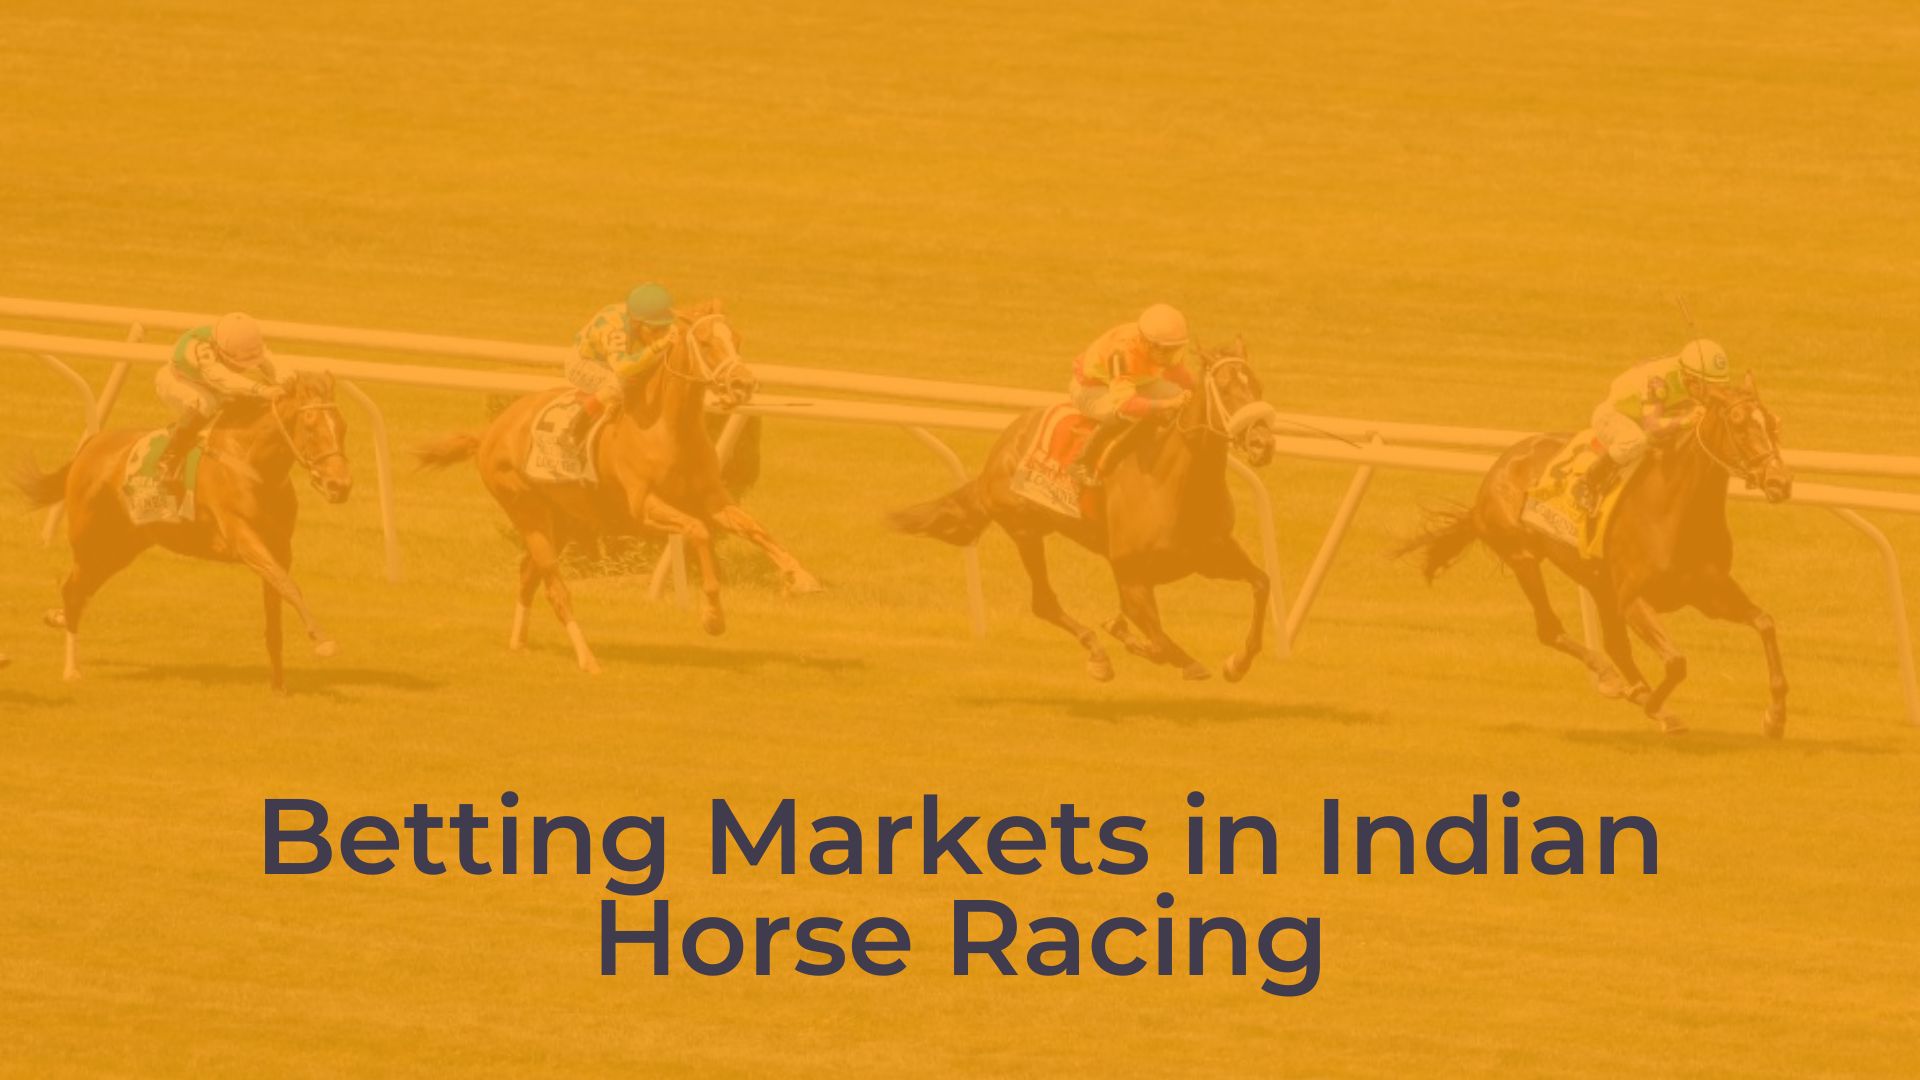 Diverse Betting Markets in Indian Horse Racing